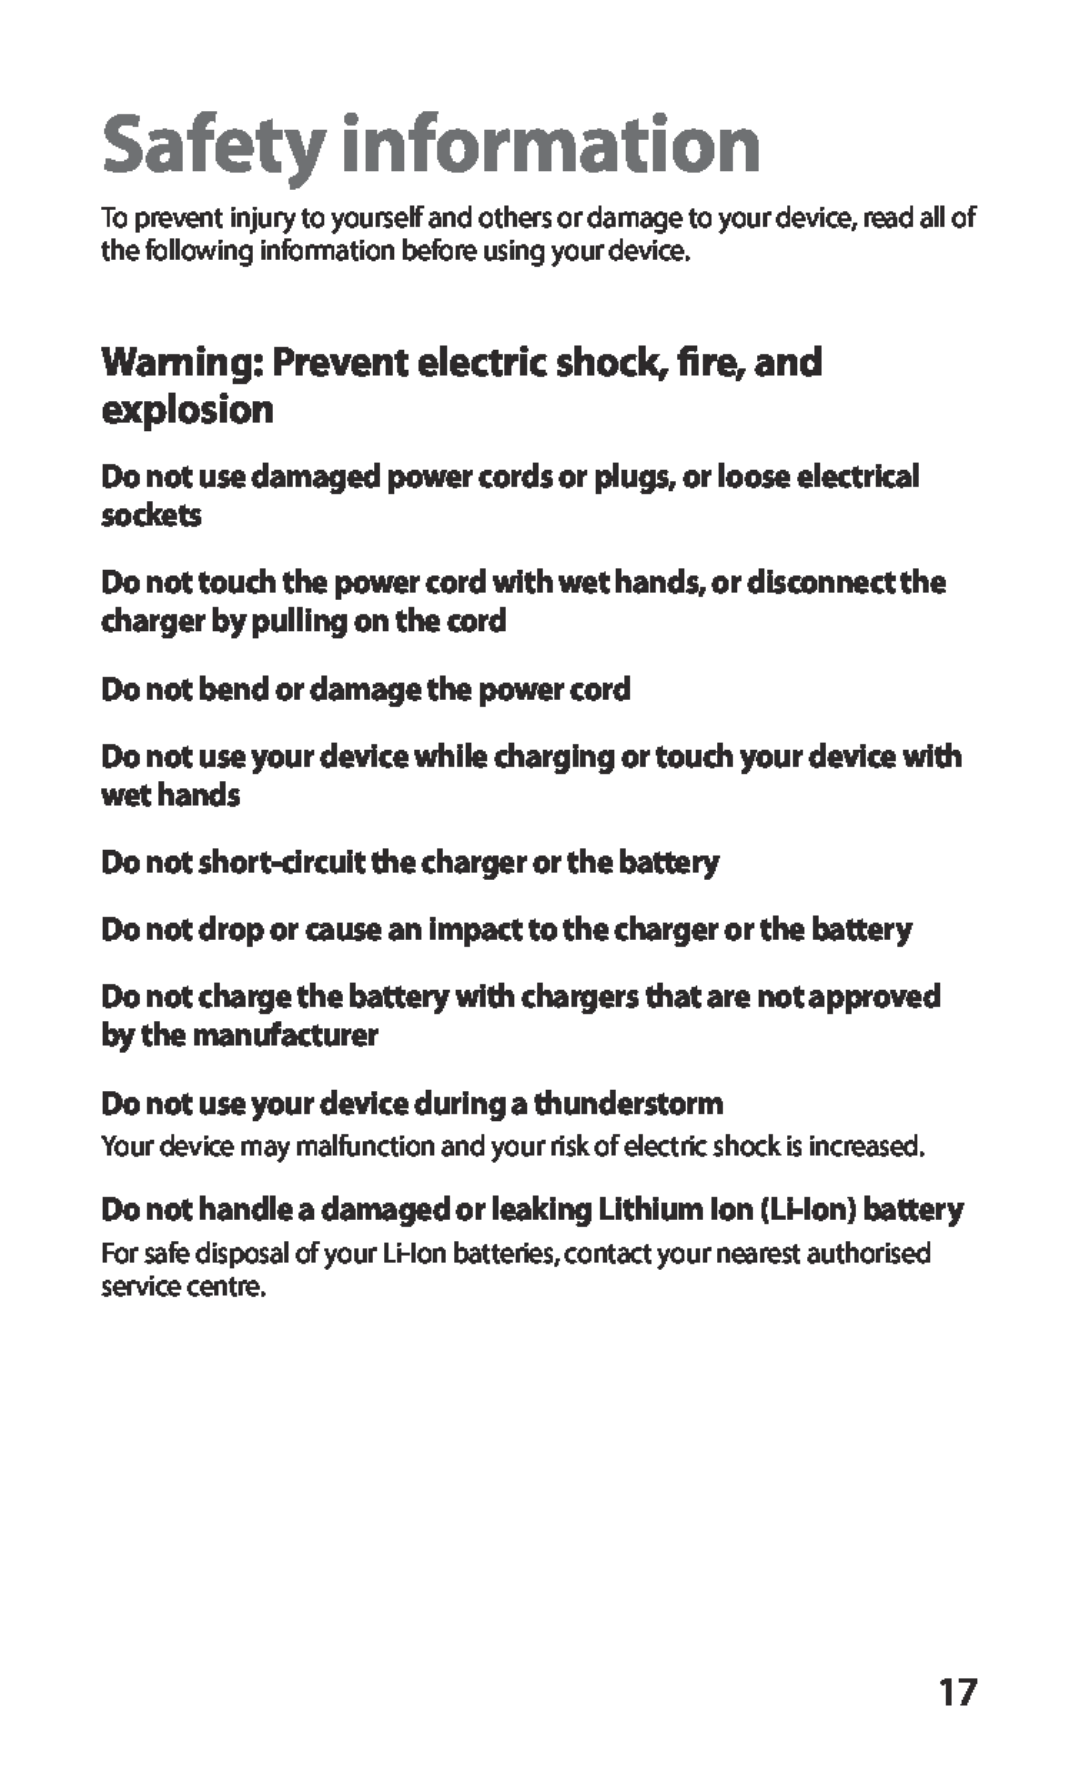 Samsung GT-S5660DSAEUR, GT-S5660DSATPH manual Safety information, Warning Prevent electric shock, fire, and explosion 